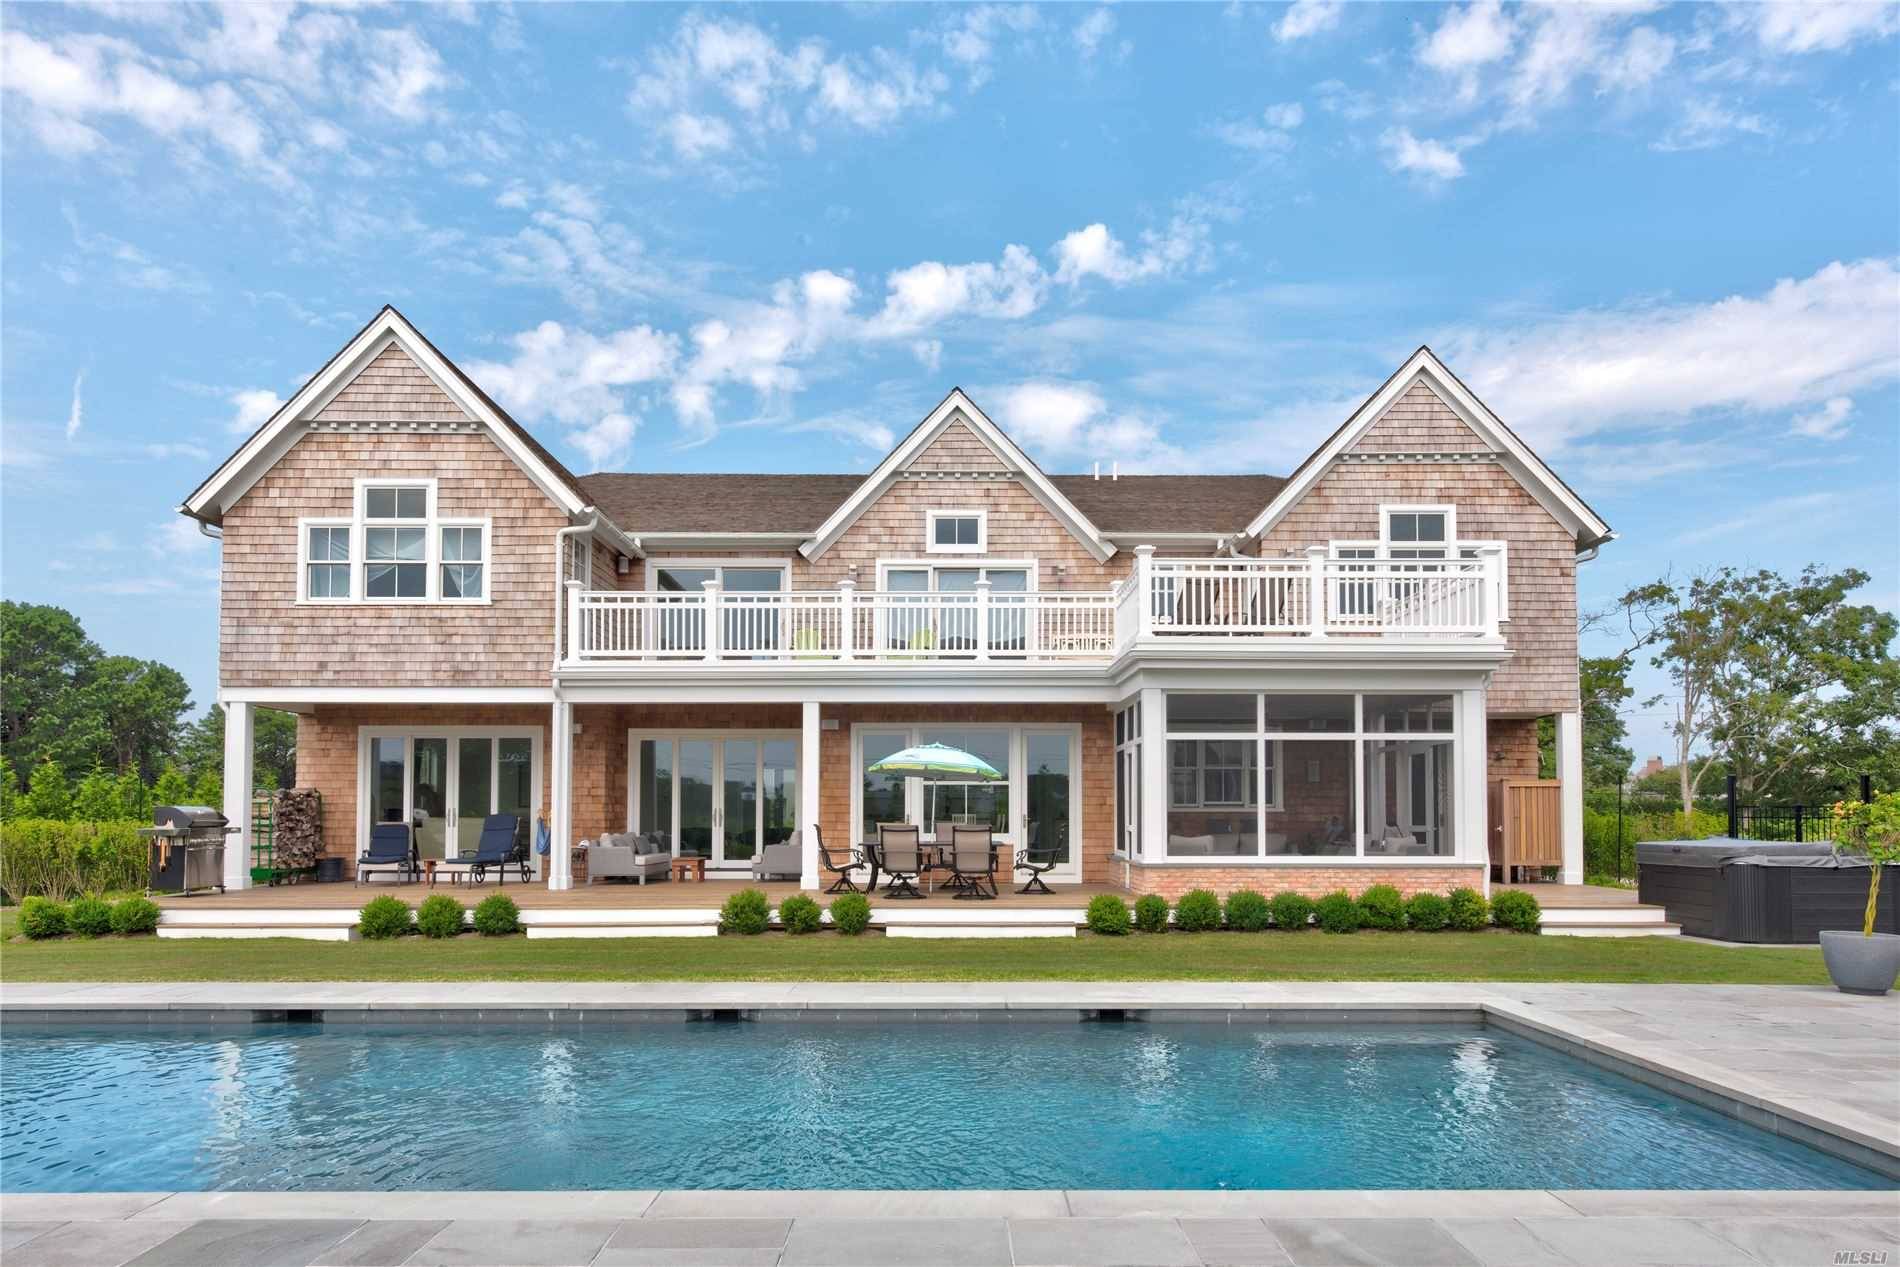 Quogue Village south of highway masterpiece.